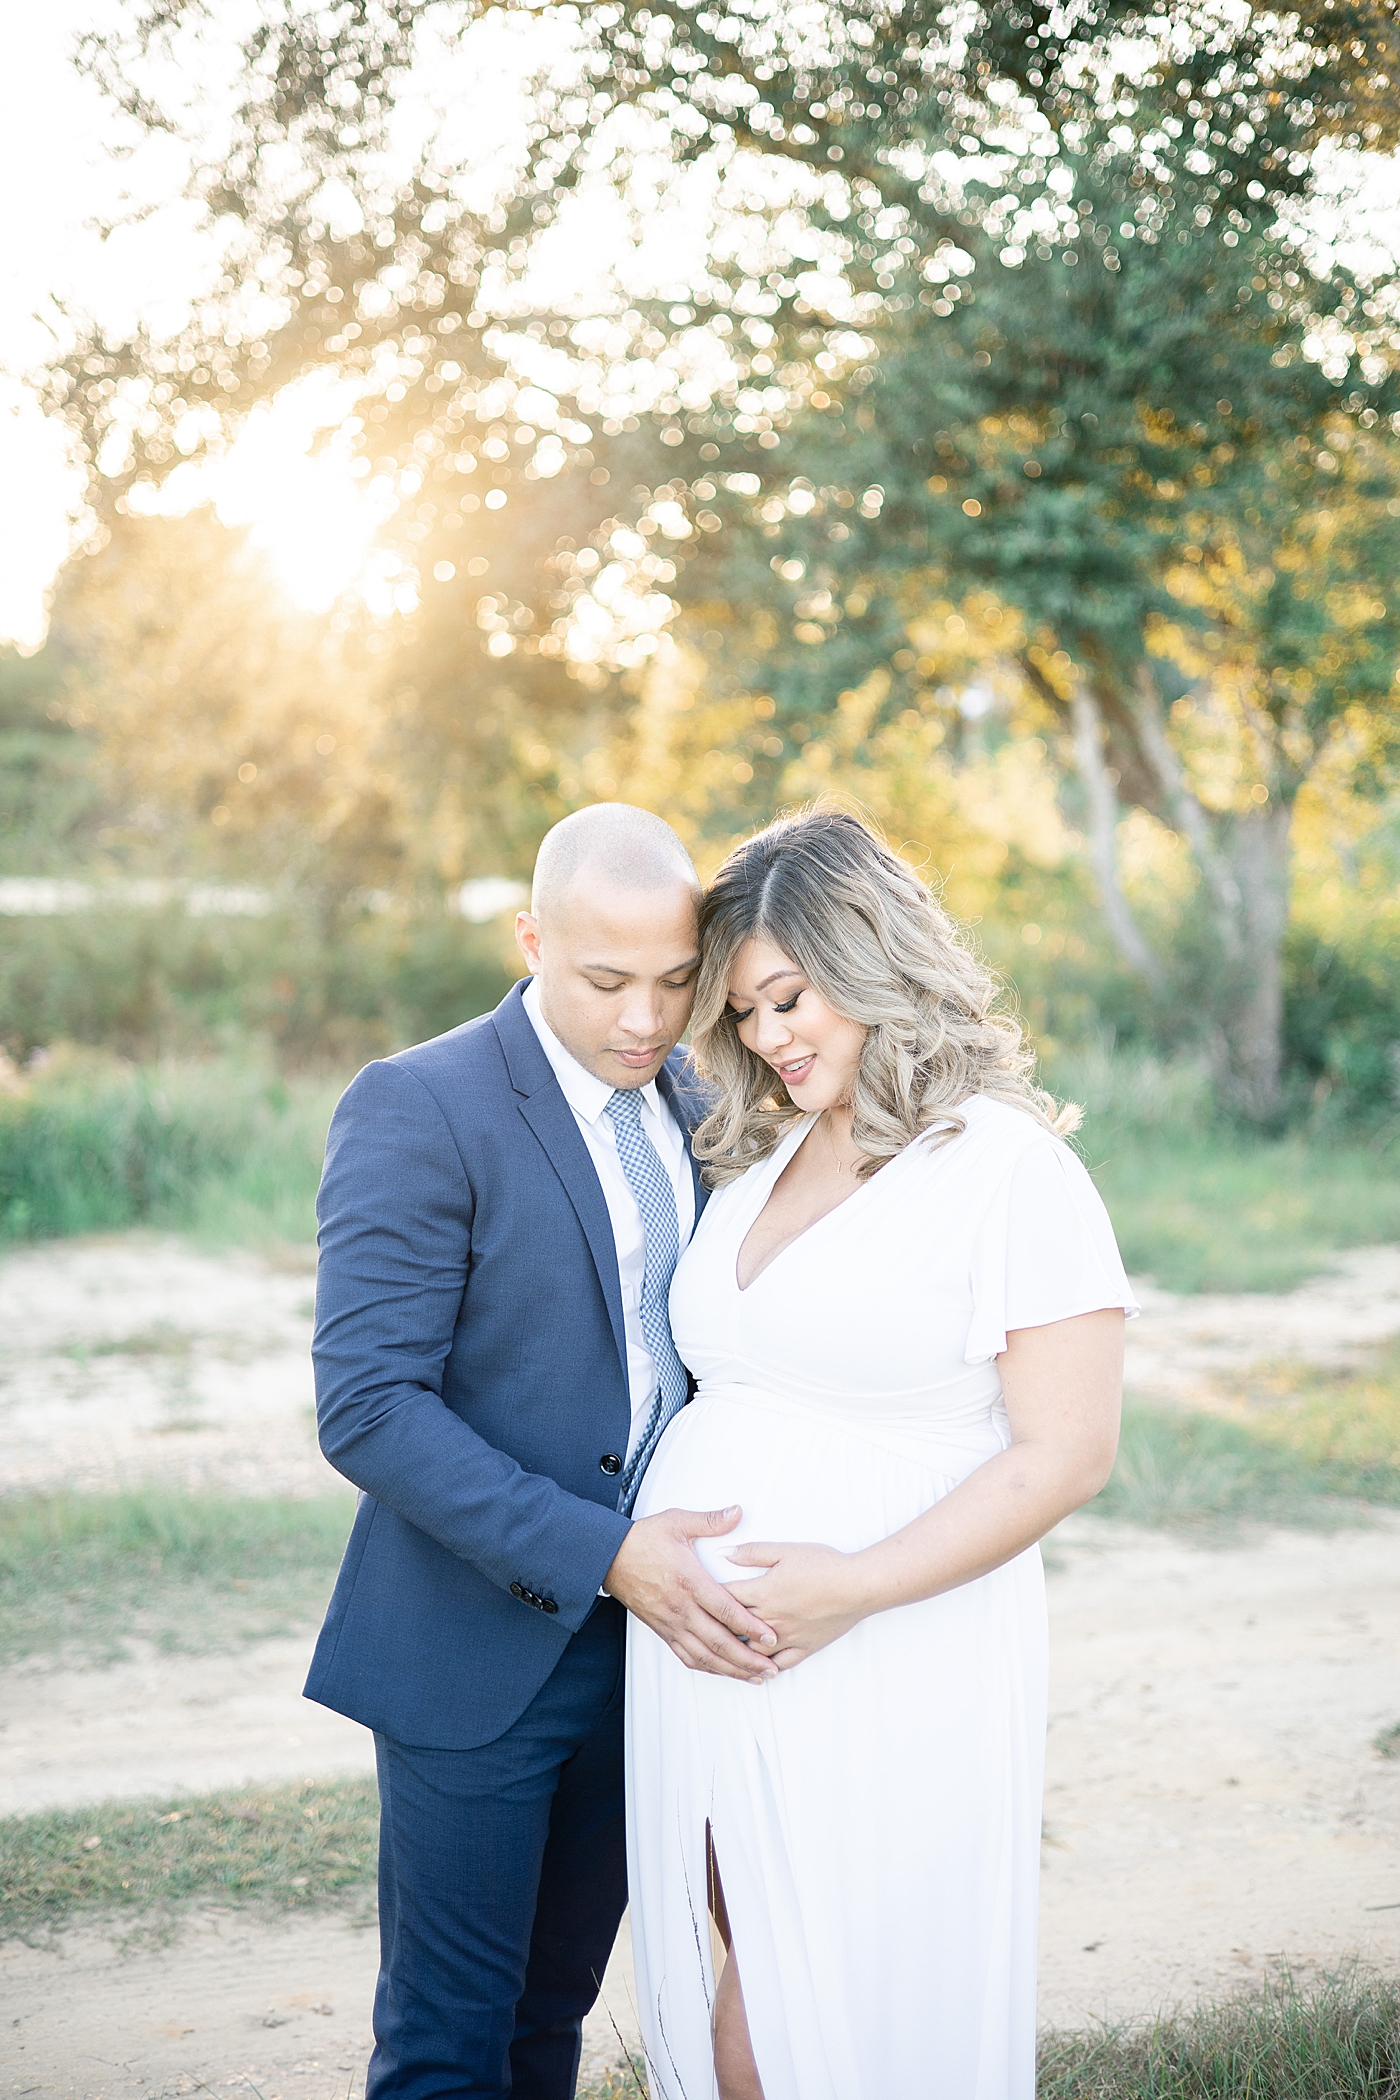 Mom and dad to be cradling her belly | Photo by Gulfport MS Maternity and Newborn Photographer Little Sunshine Photography 